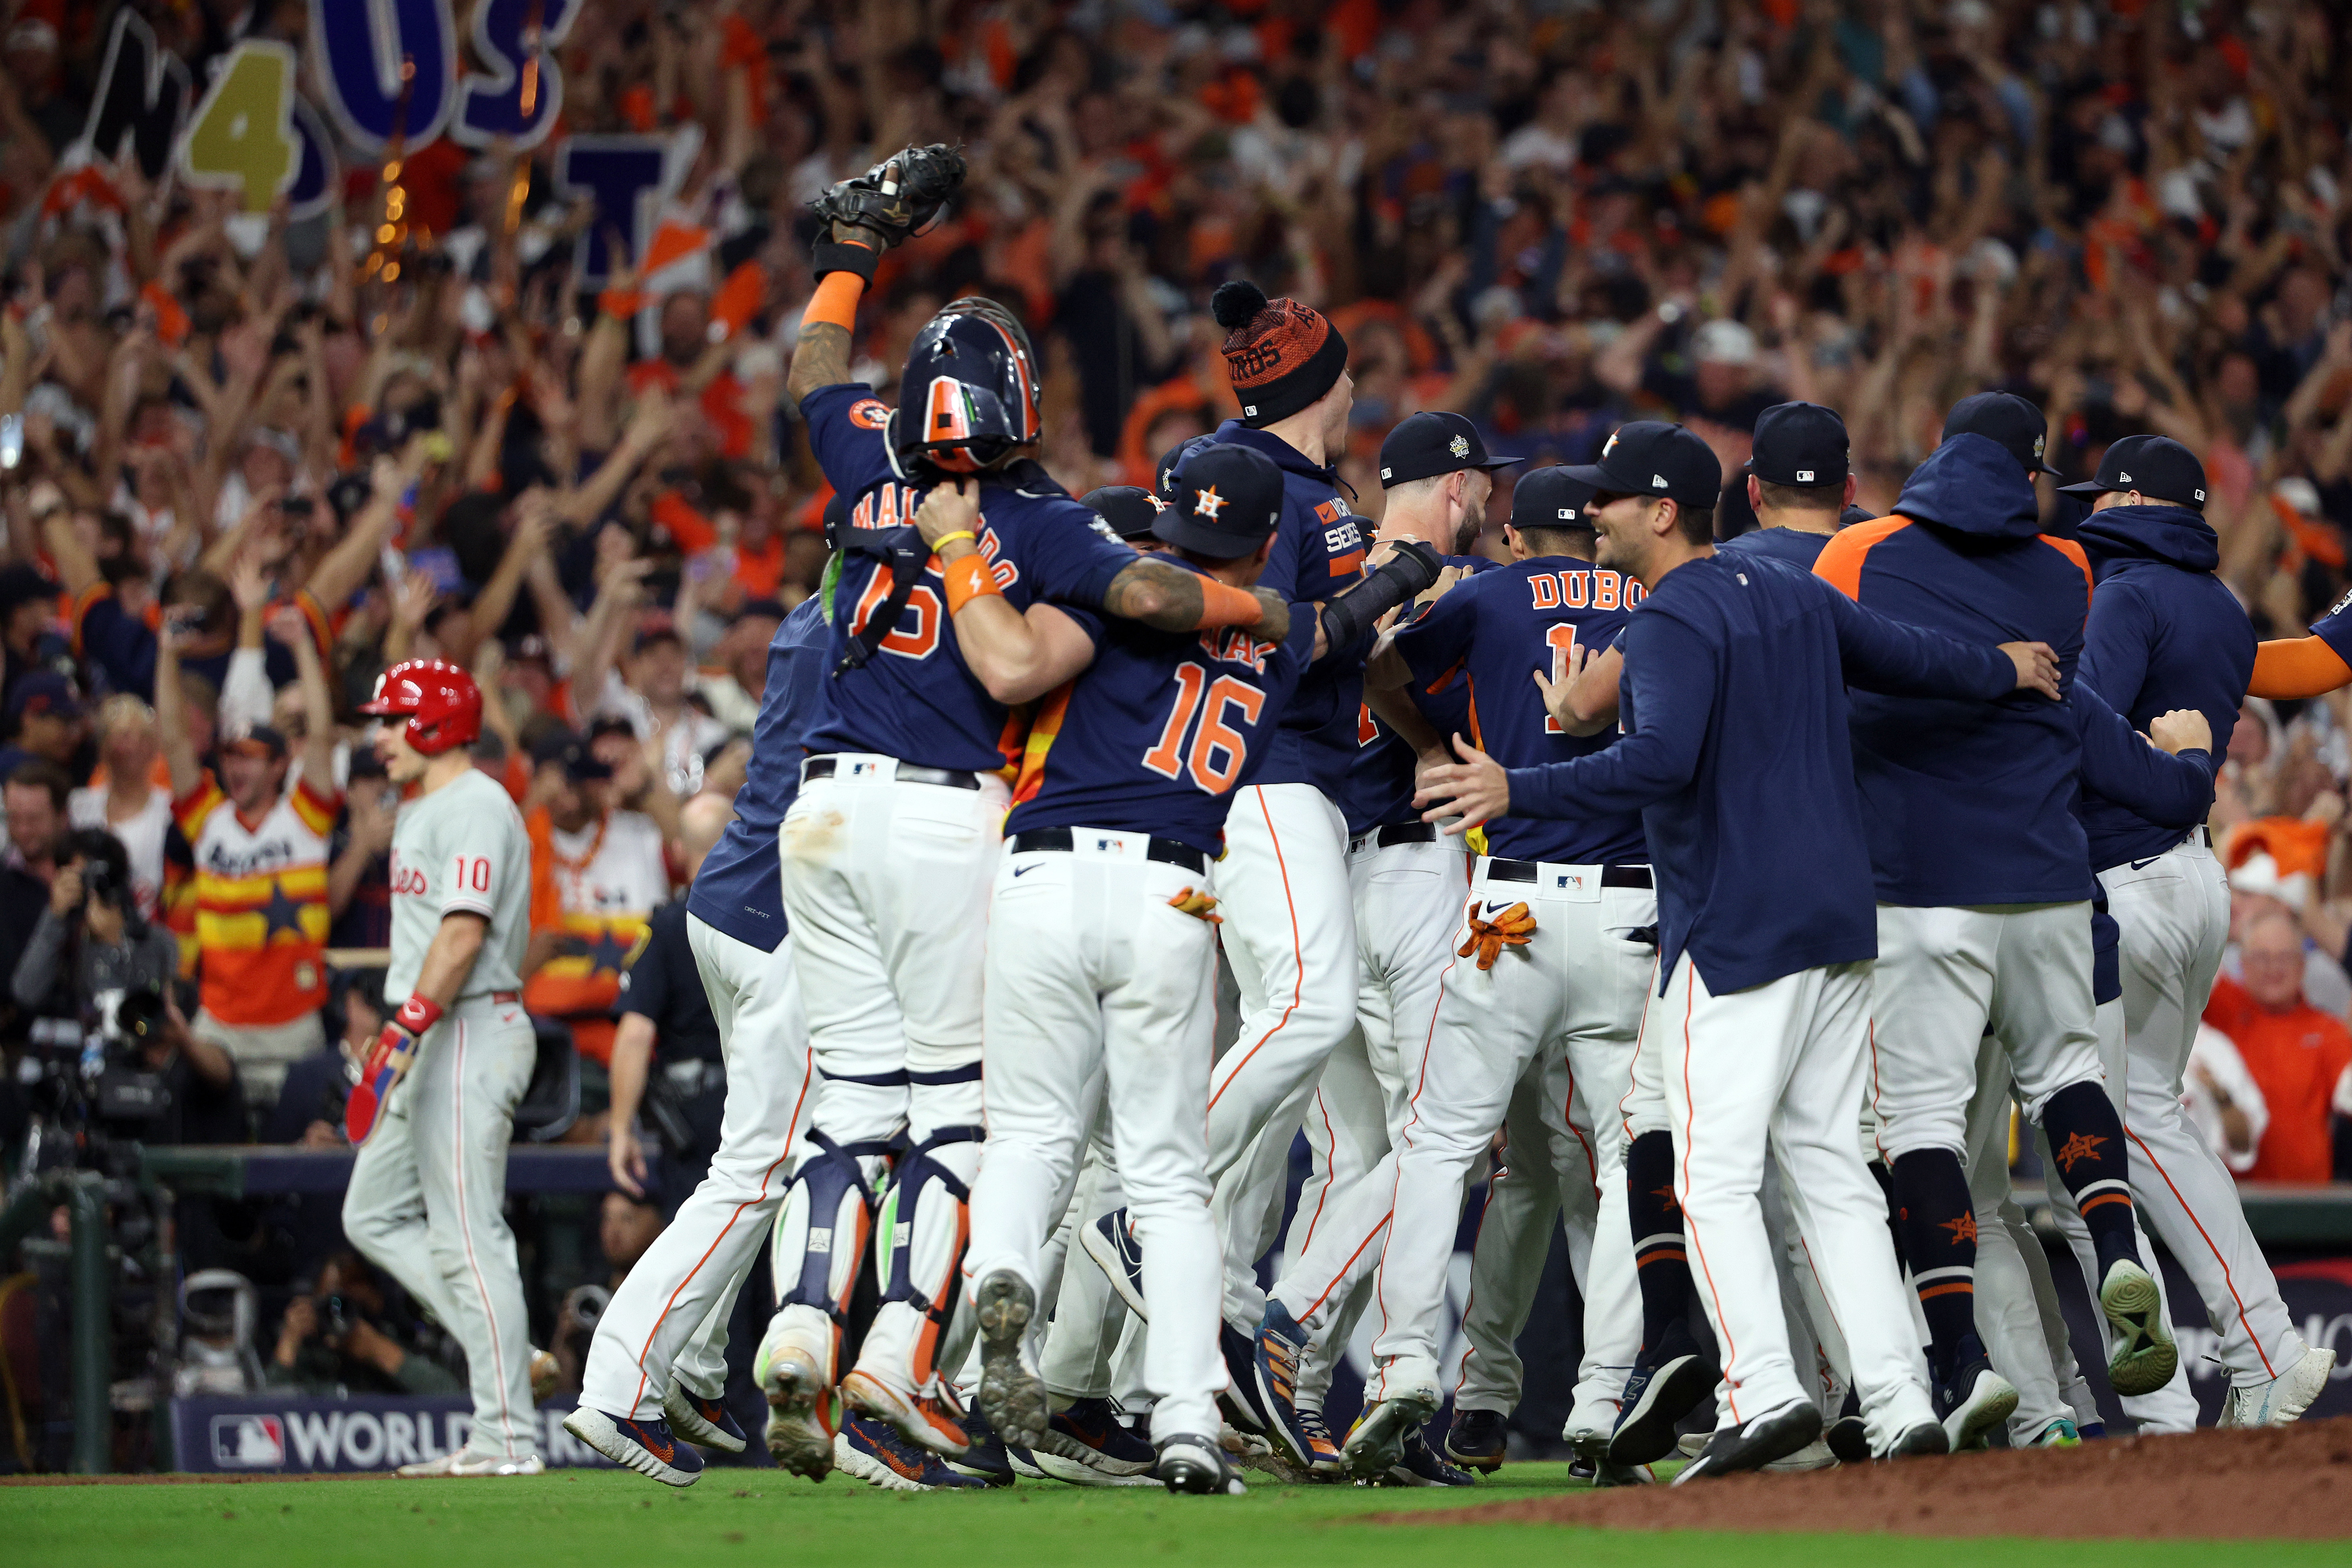 Astros defeat Phillies in Game 6 to win 2nd World Series title